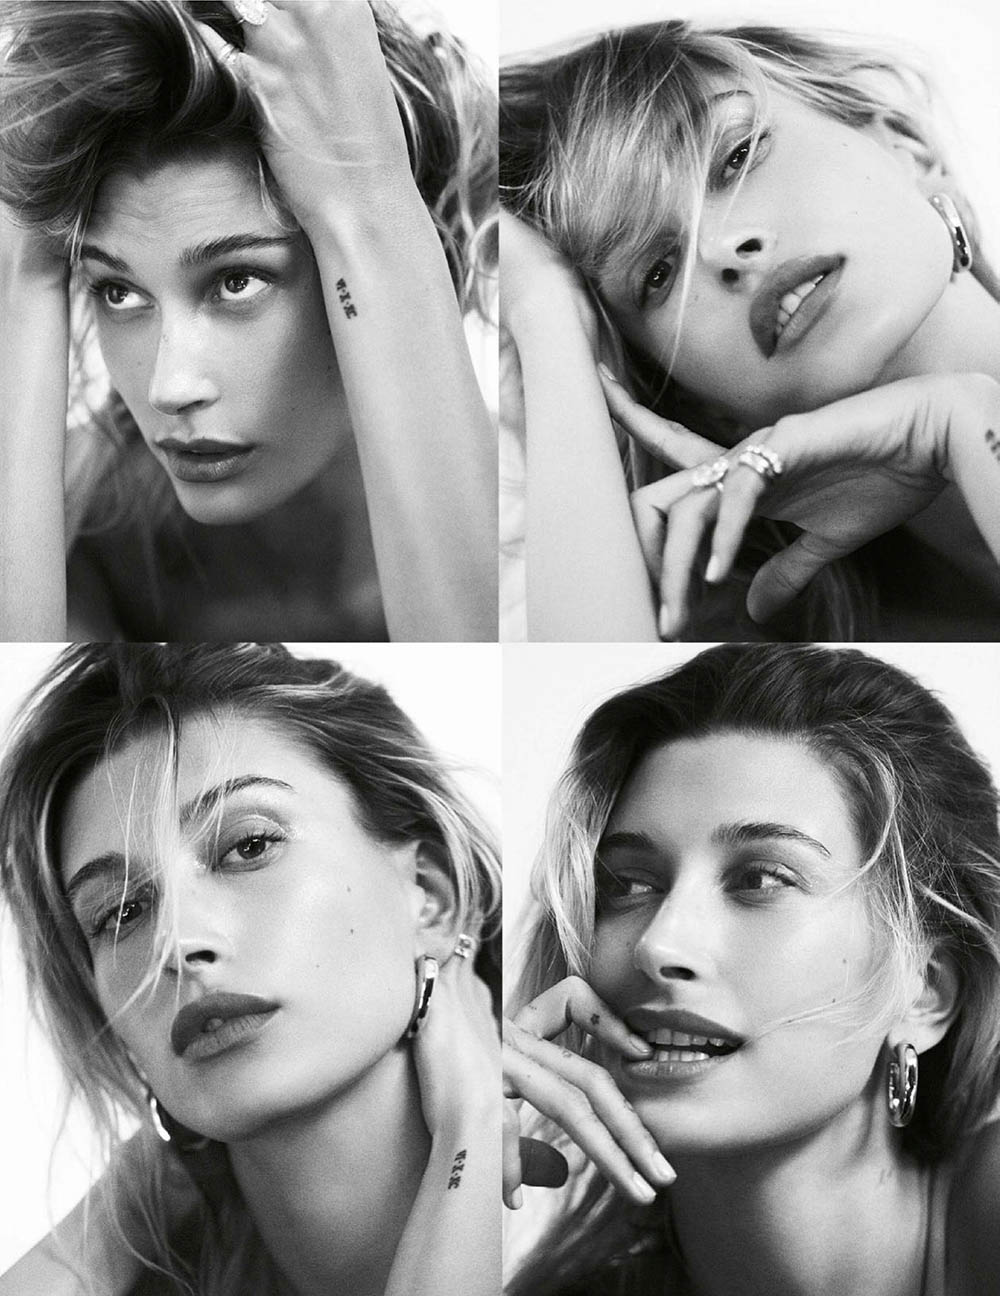 Hailey Bieber covers Vogue India August 2020 by Zoey Grossman